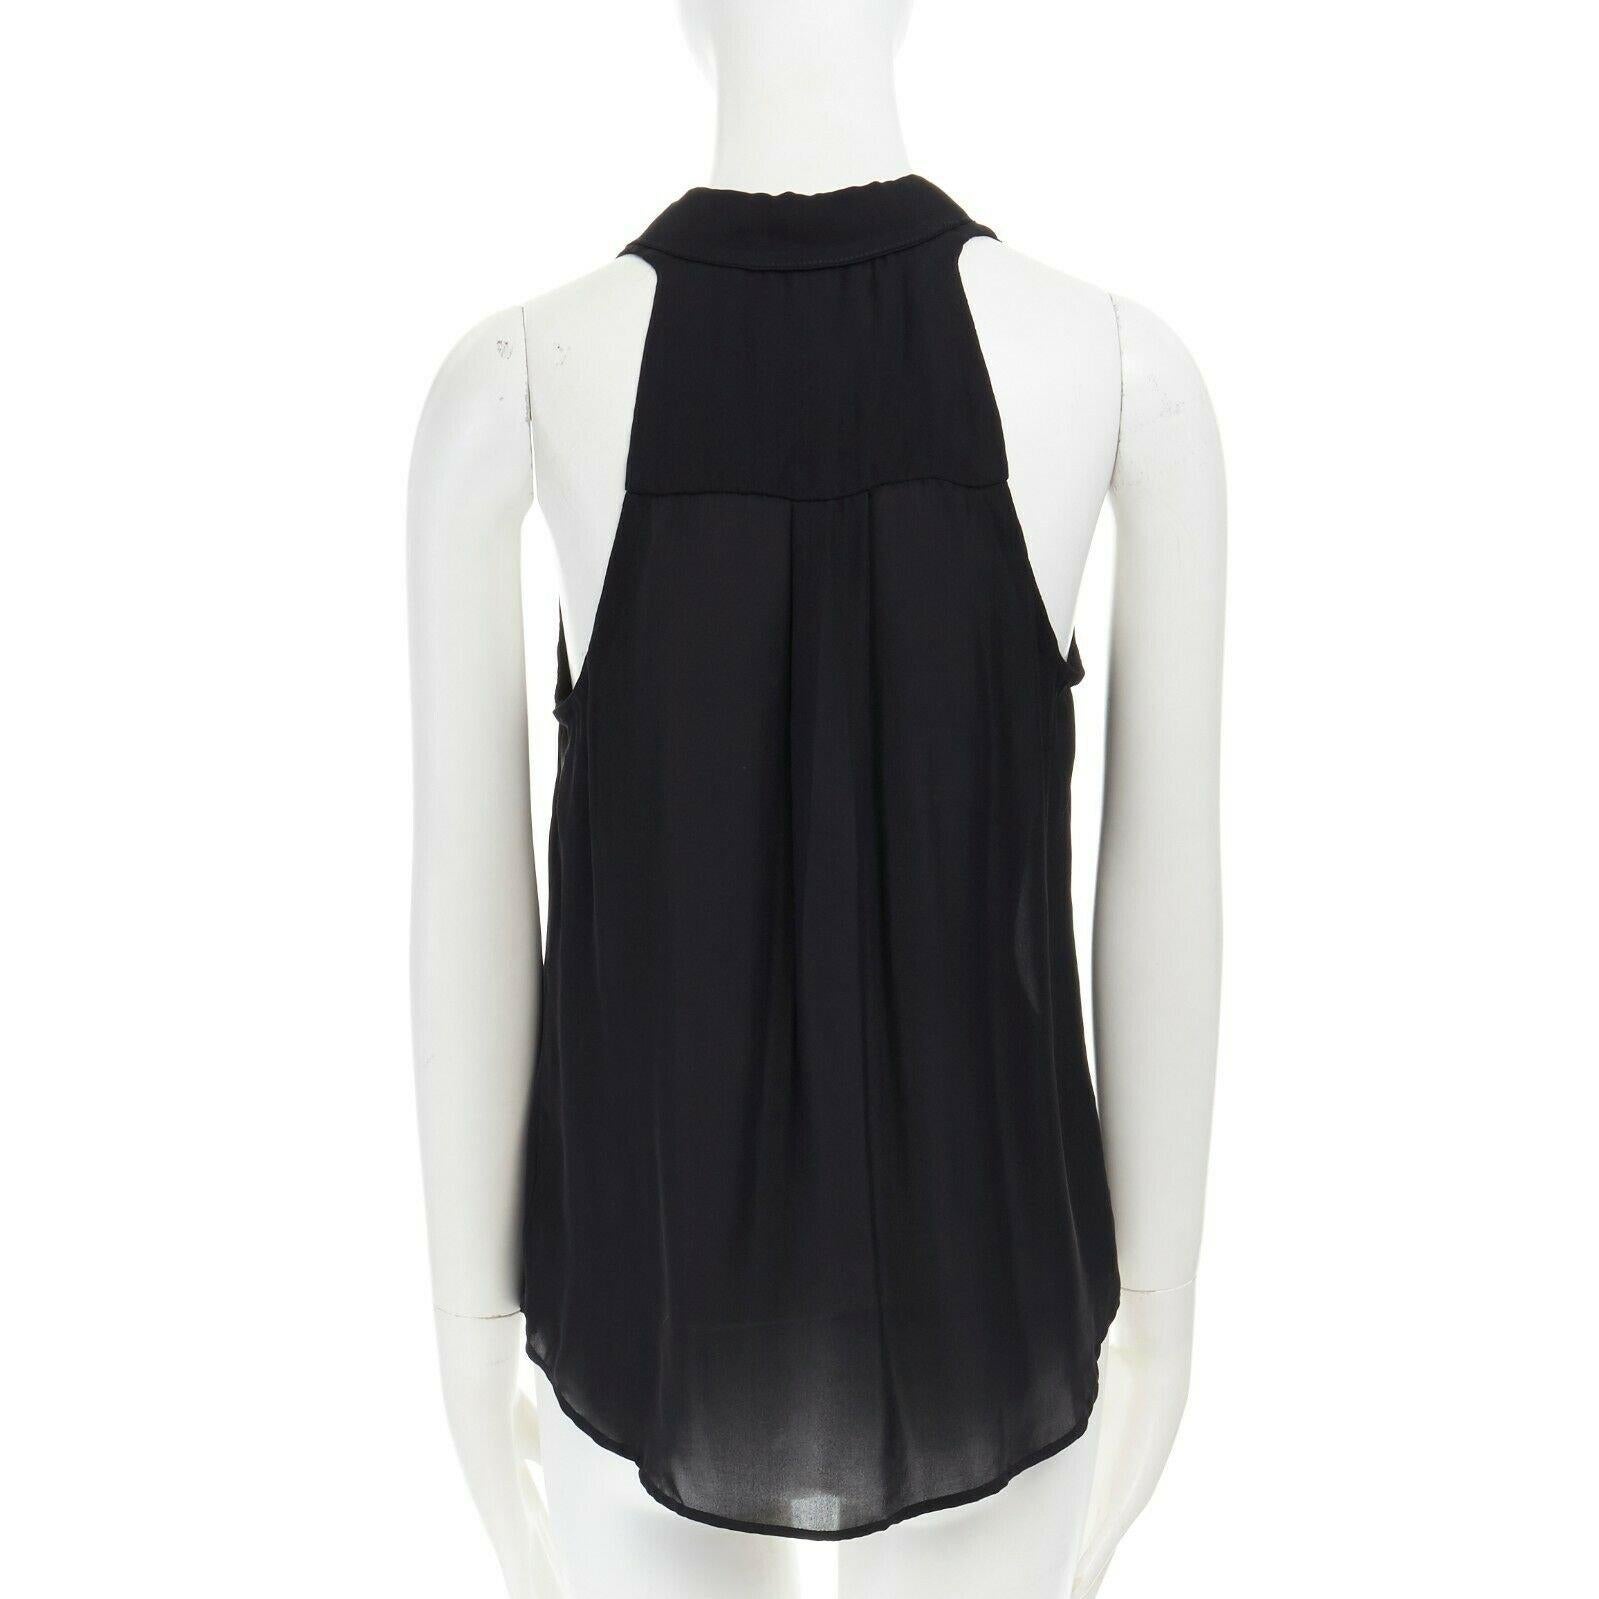 ALC black 100% washed silk spread collar button front sleeveless shirt top XS
Brand: A.L.C.
Model Name / Style: Silk sleeveless top
Material: Silk
Color: Black
Pattern: Solid
Closure: Button
Extra Detail: Spread collar. Concealed button front